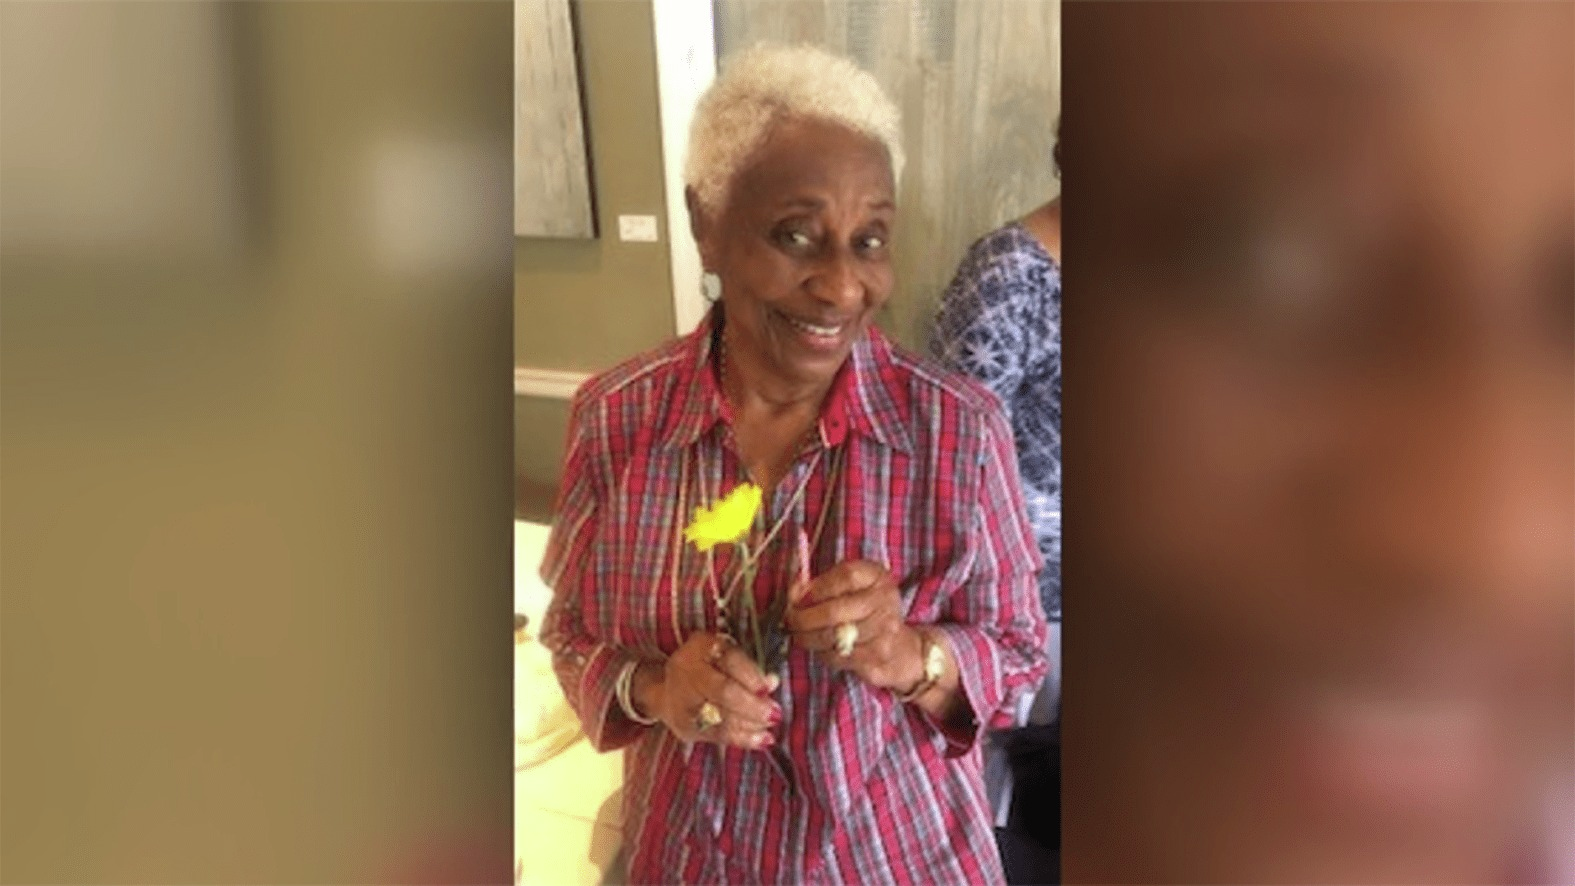 Dallas police continue search for 88-year-old woman who has been missing for more than two weeks